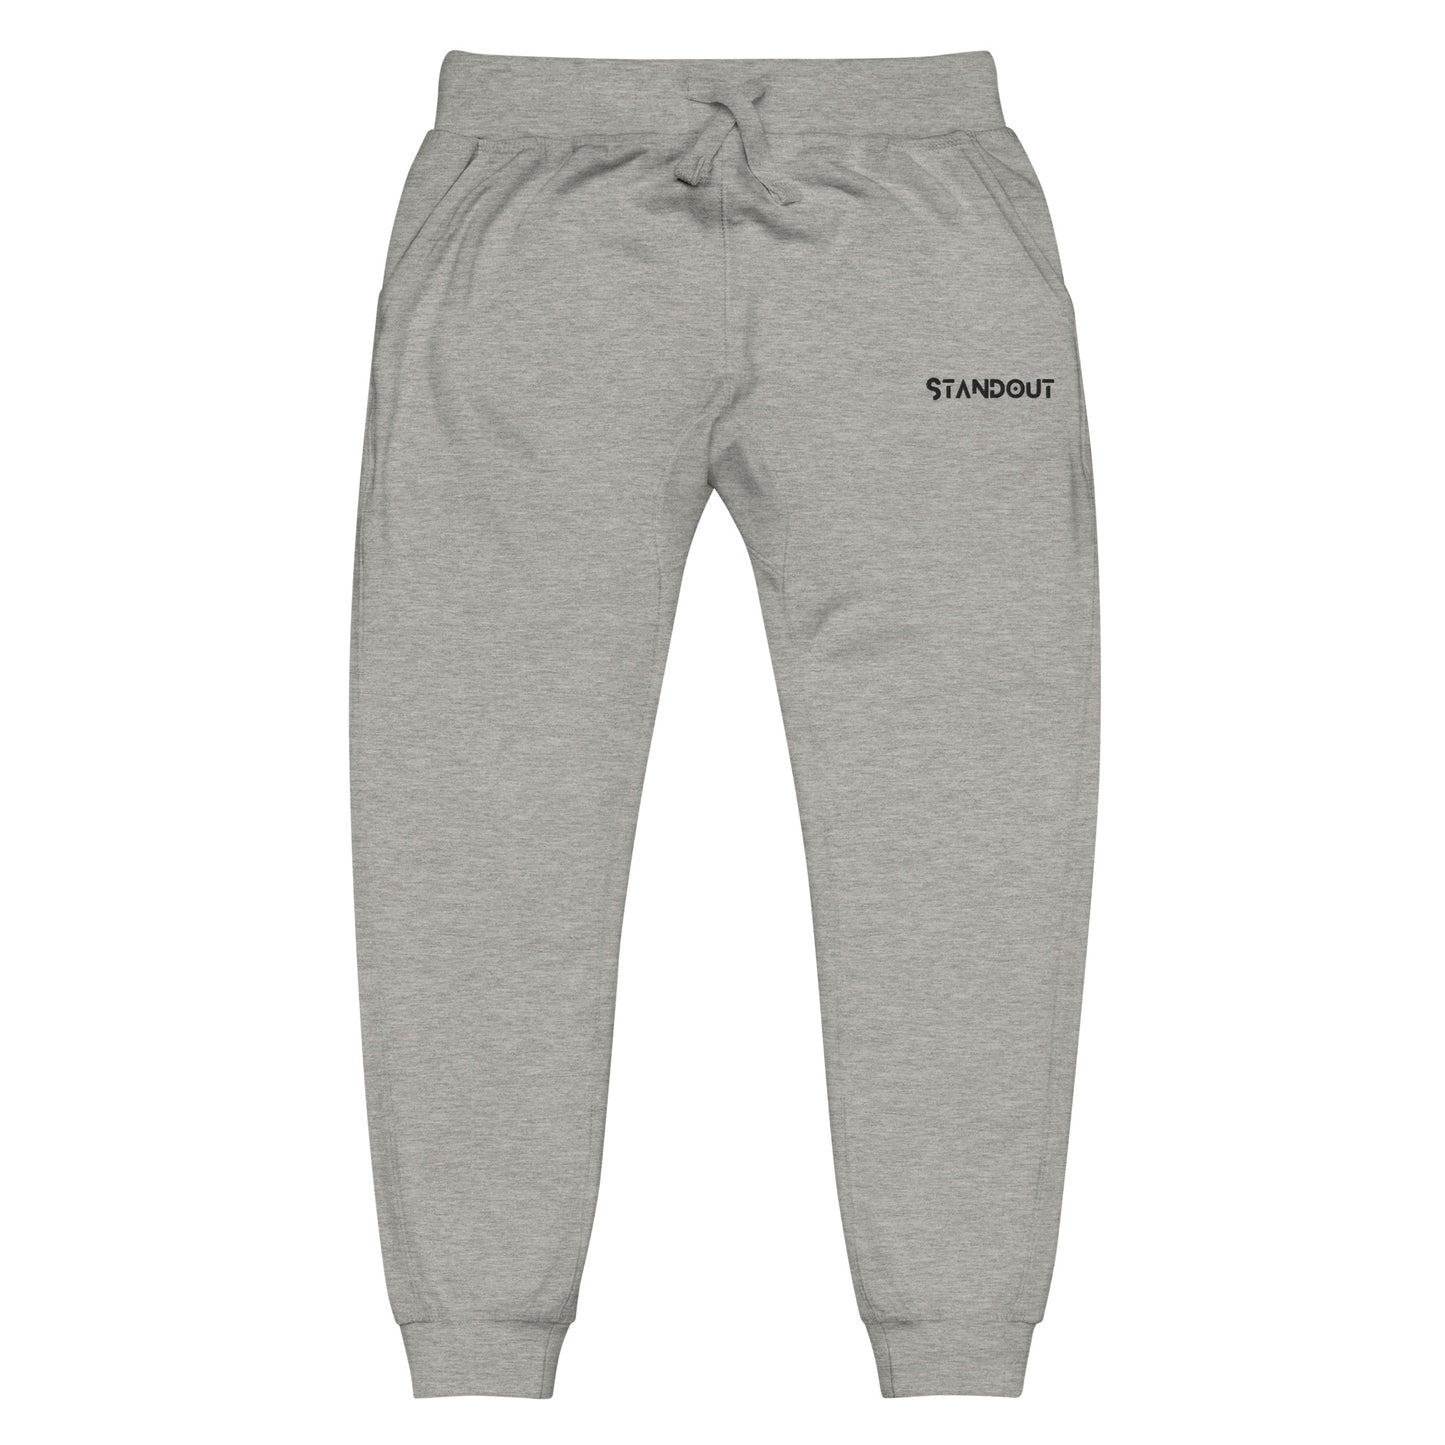 STANDOUT EMBROIDERED Unisex fleece sweatpants designed by SPICCA